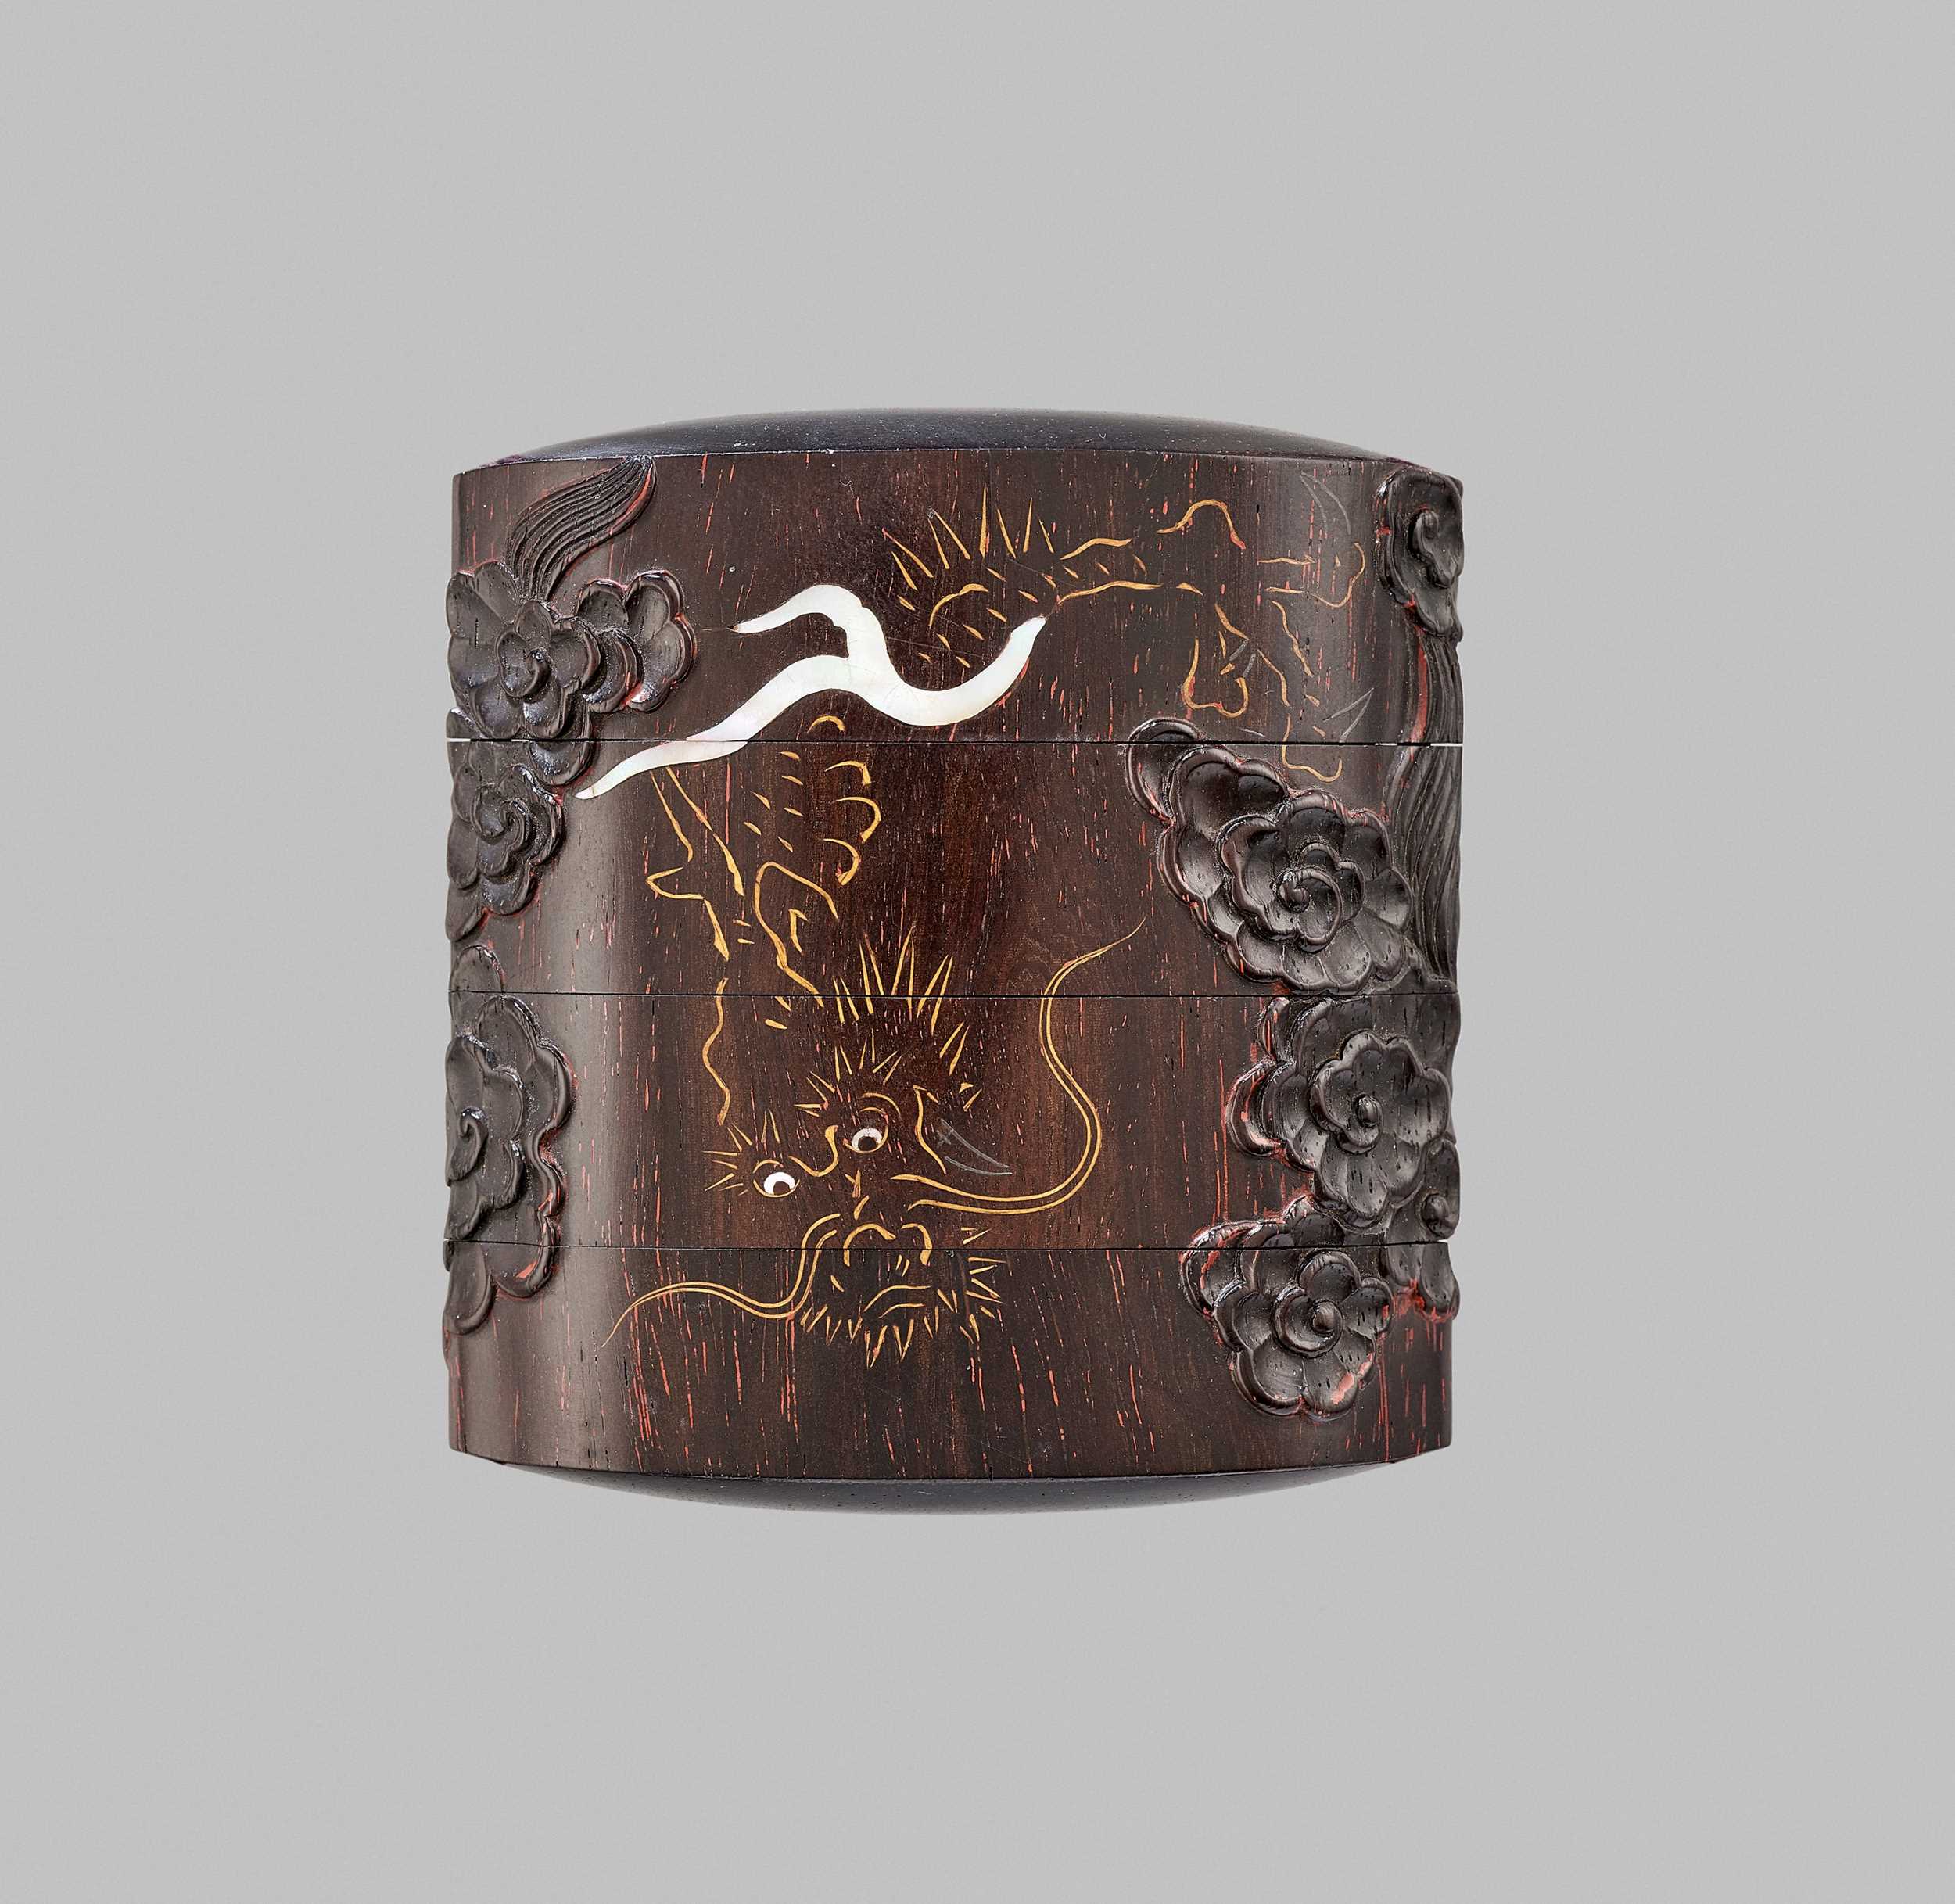 Lot 331 - AN UNUSUAL INLAID LACQUER THREE-CASE INRO DEPICTING A DRAGON AMID CLOUDS